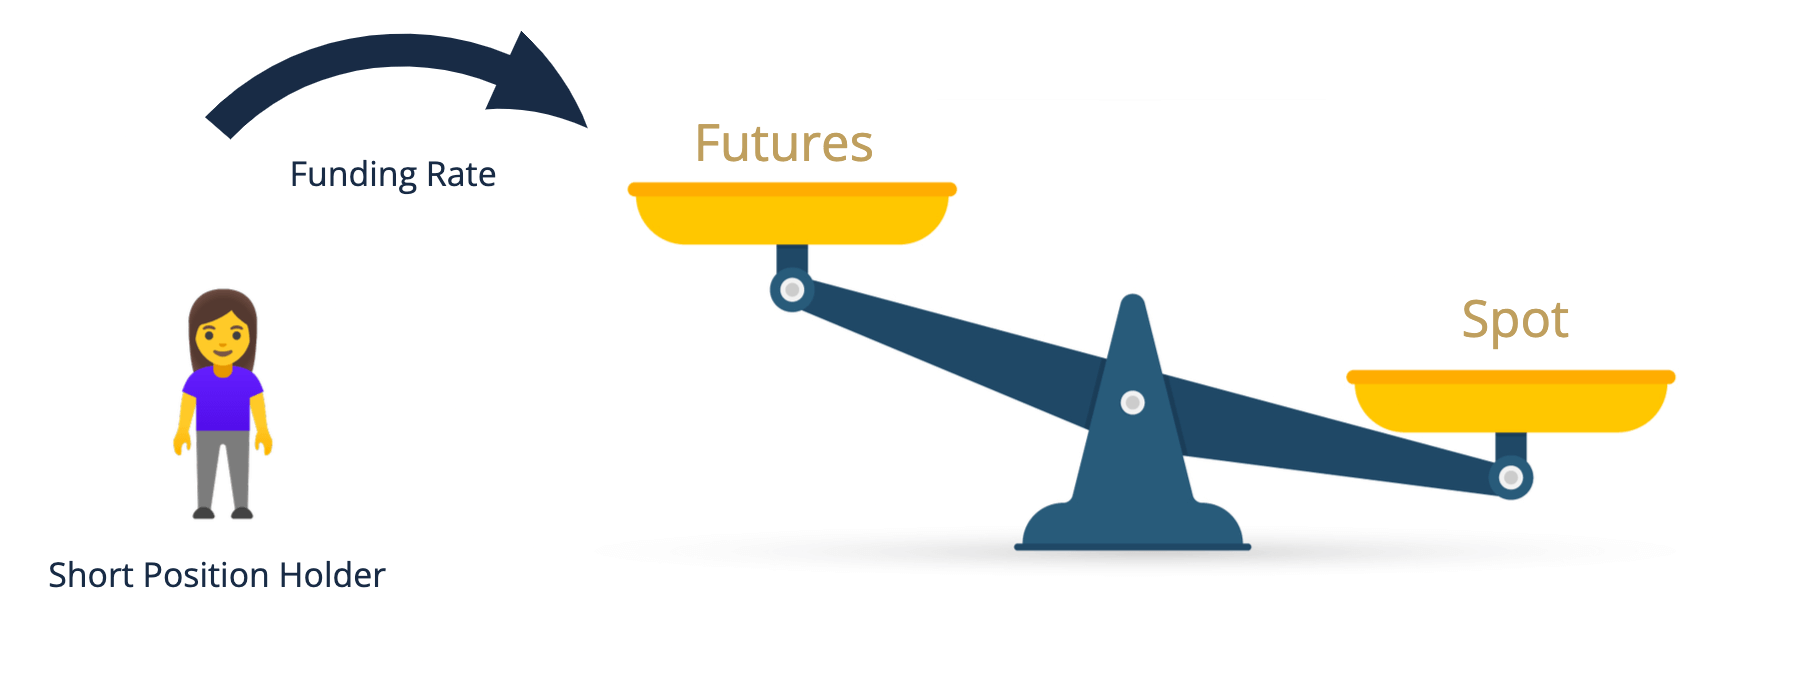 Illustration of a scale with futures and spot side. The futures side has much less weight. For this reason, an arrow with the label «Funding Rate» points from «Short Position Holder» to «Futures». Thus, the funding rate transfer adds weight to the futures side.